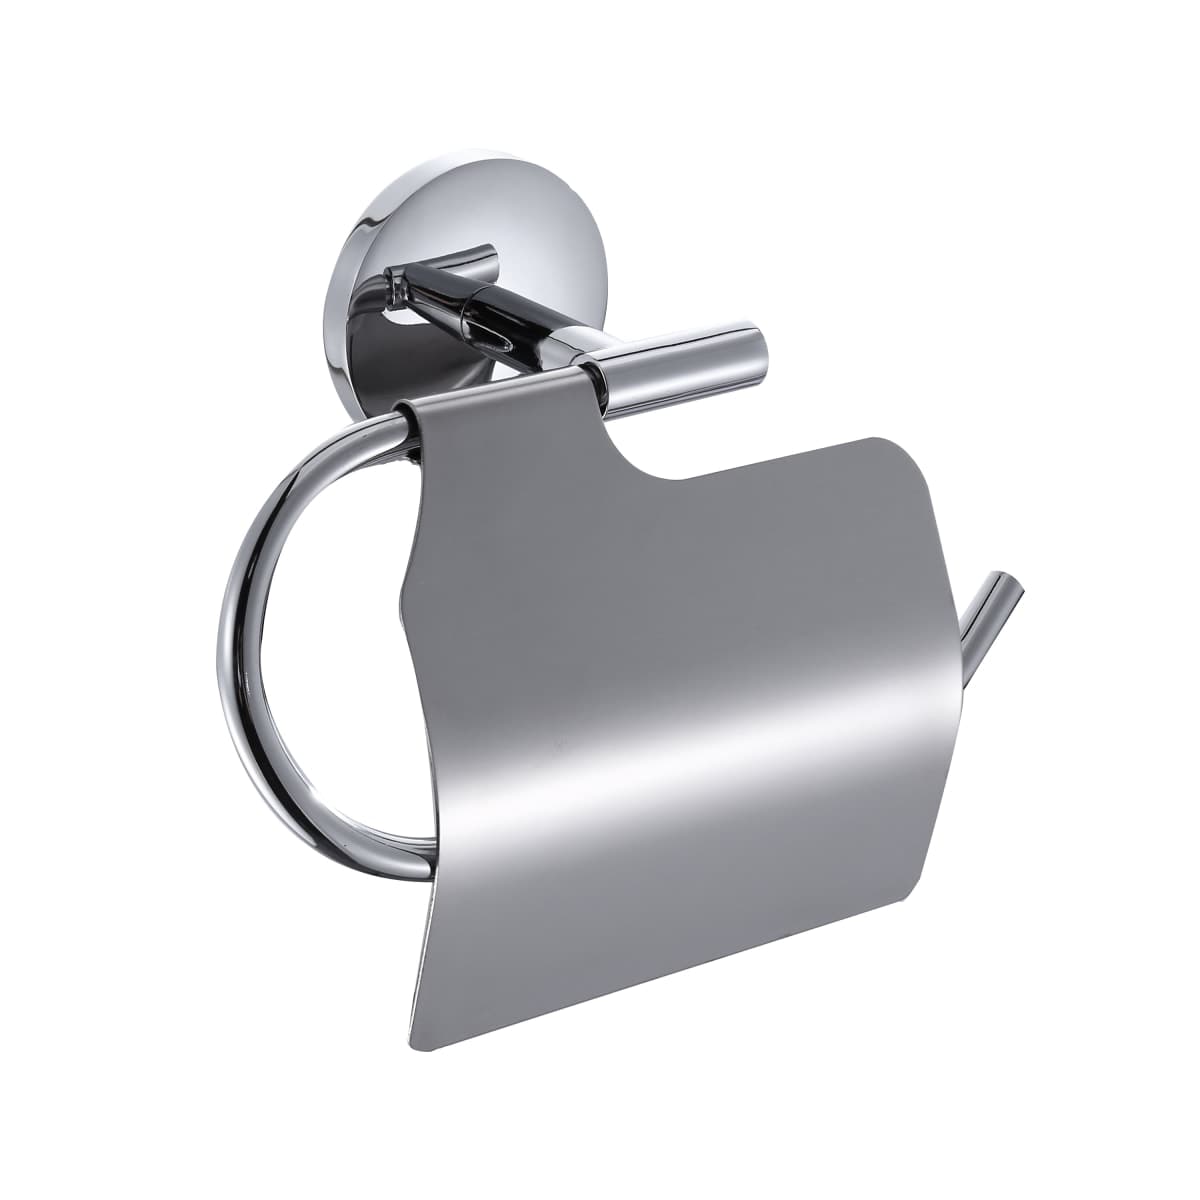 TOILET ROLL HOLDER COVERED WITH SCREWS OR ADHESIVE SUITE SENSEA CHROME - best price from Maltashopper.com BR430410889